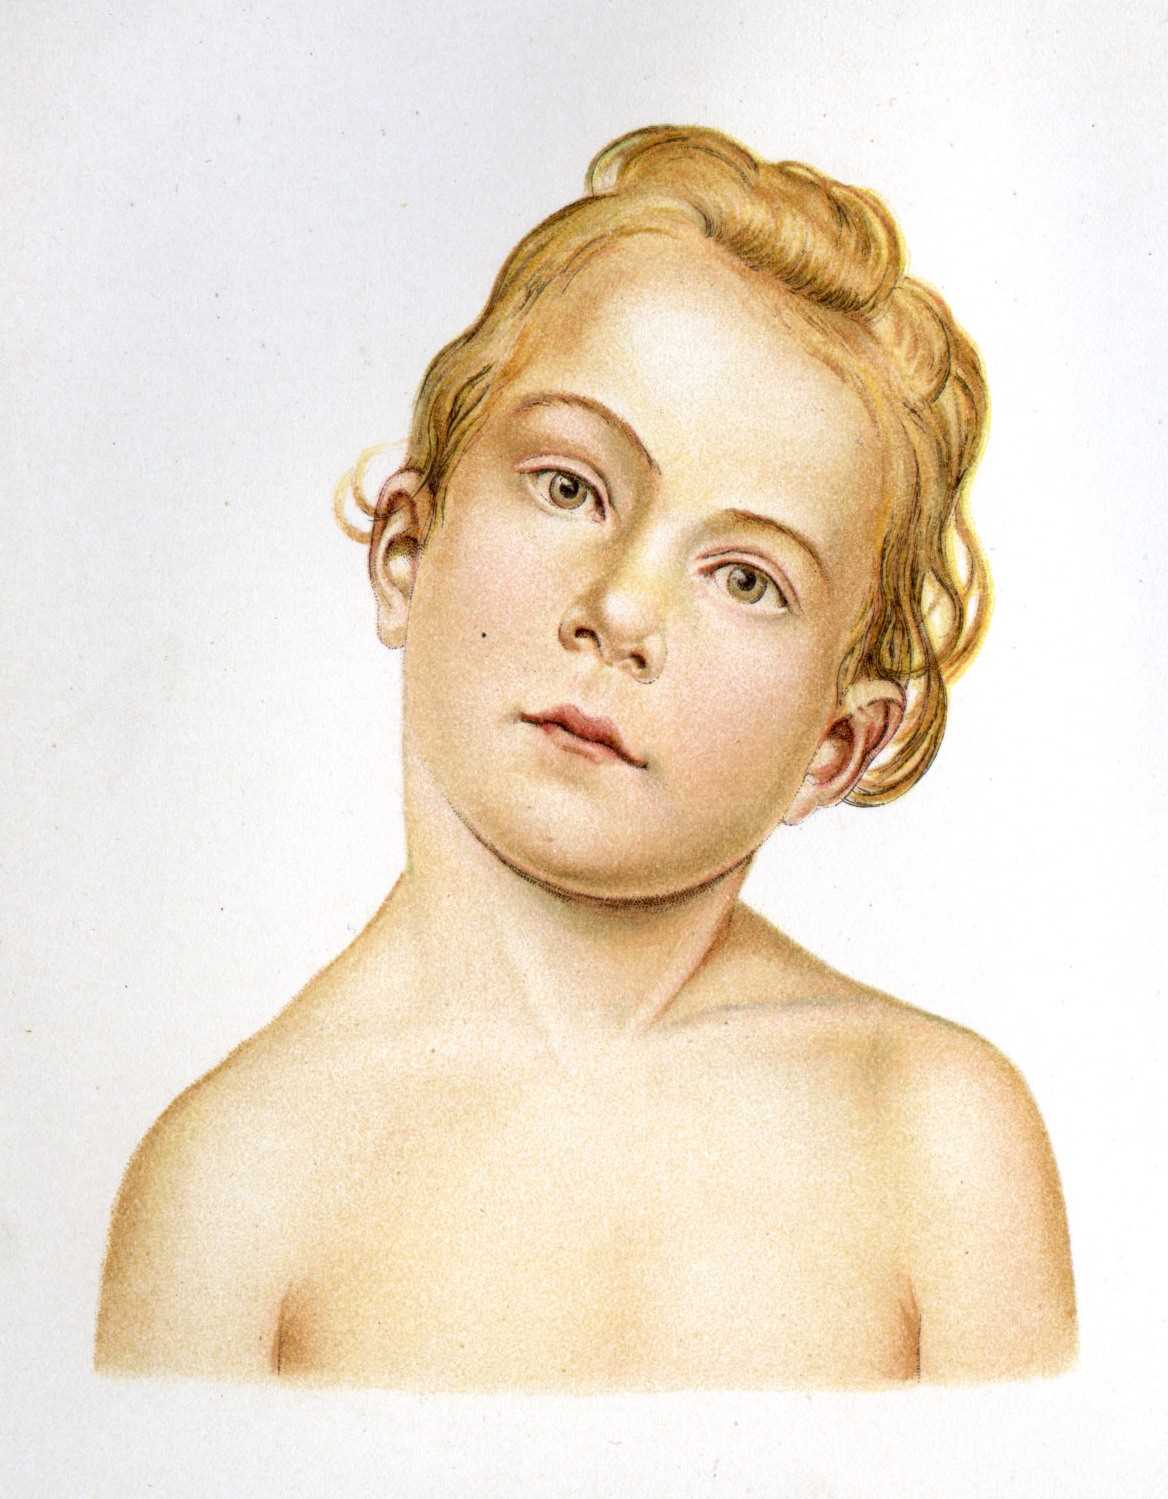 A child with Torticollis